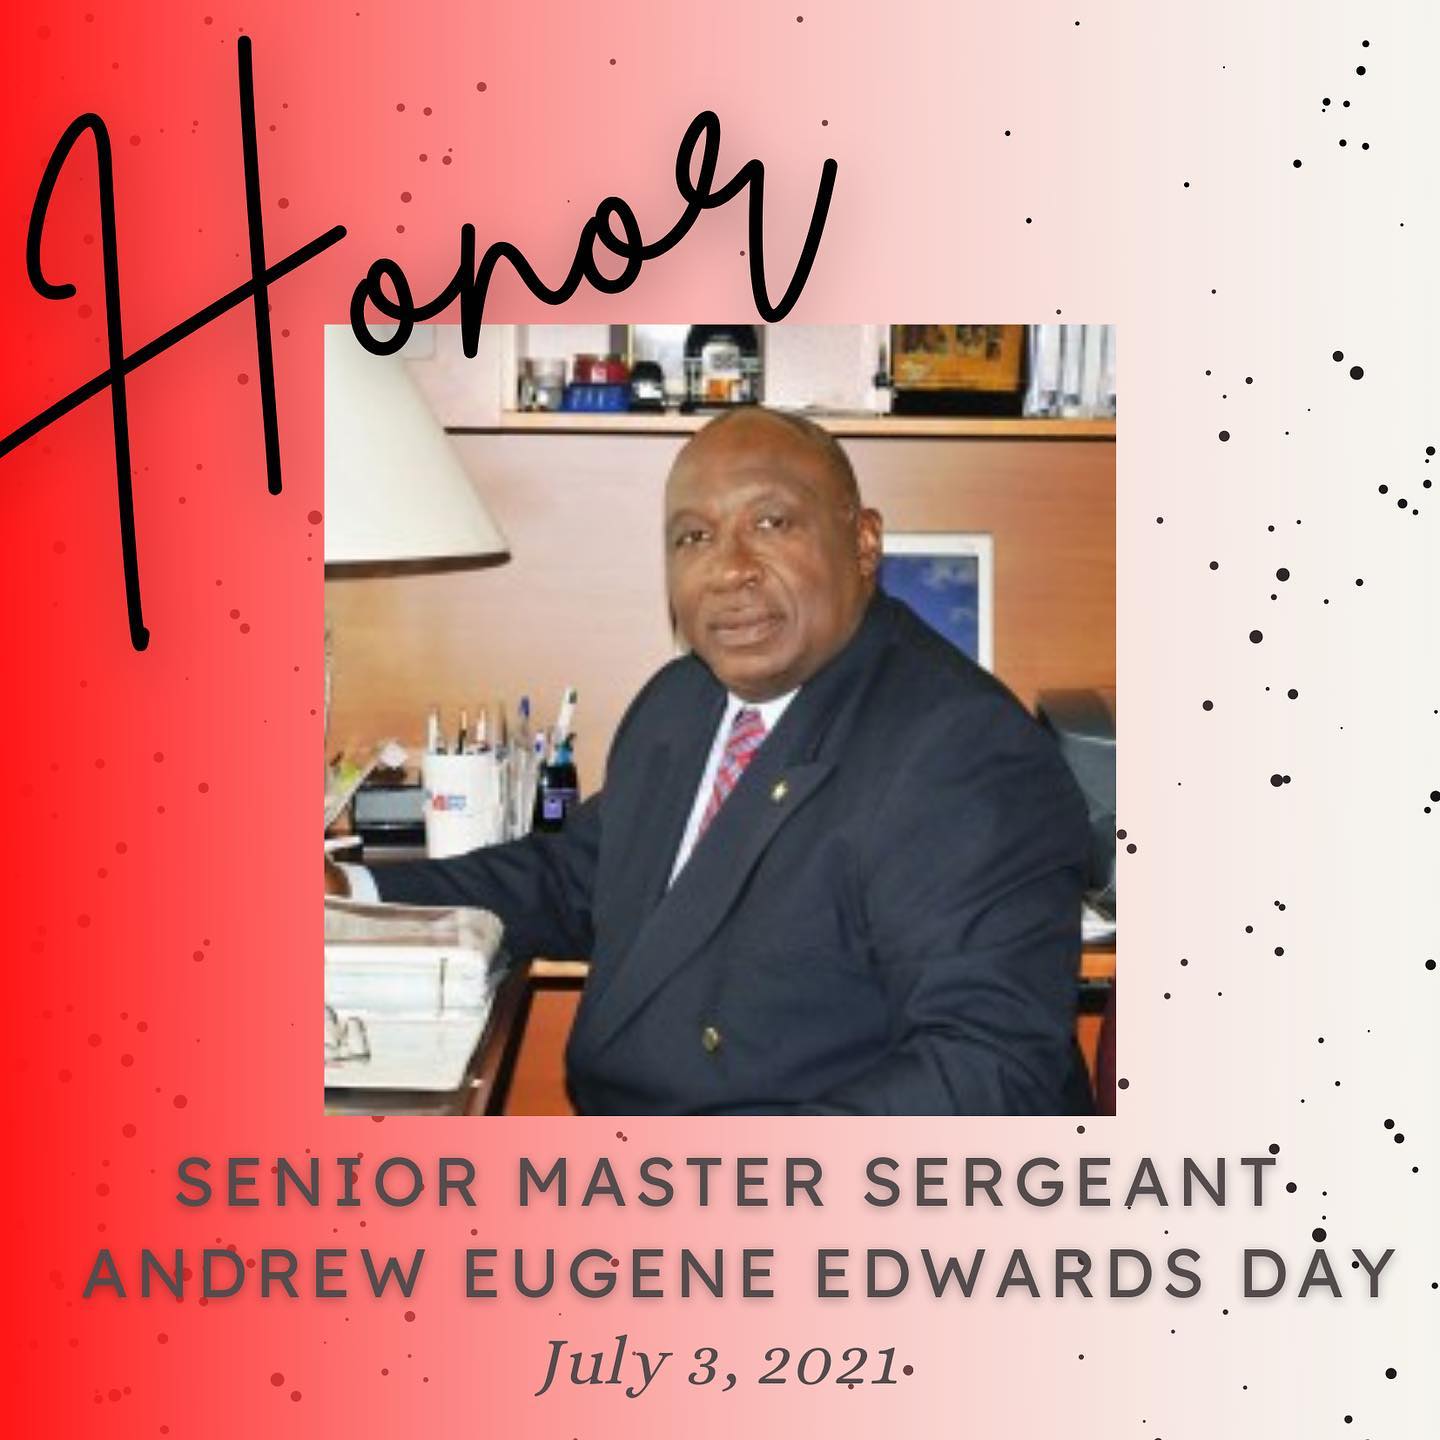 Today we celebrate Senior Master Sergeant Andrew Eugene Edwards Day. Our founder, Mr. Edwards, was recognized by the Prince George's County Council for his contribution to his community as a decorated veteran and as founder and chairman of the Academic Empowerment Foundation, Inc. Throughout his years of serving the DC/MD/VA community, he has helped over 16,500 high school senior football players pursue their higher education goals. We are honored to continue his legacy. We continue our founder's commitment to helping students' prepare for and get through college with our semi-annual book grant, SAT & Financial Aid sessions, and sharing relevant information with you, our AEF Family. We hope you'll help us honor Mr. Edwards on his day and continue his legacy by visiting our website (link in bio) and making a donation of any amount.  If Mr. Edwards’ work impacted you in any way over the years, we encourage you to leave a kind note or memory in the comments below. Thank you!